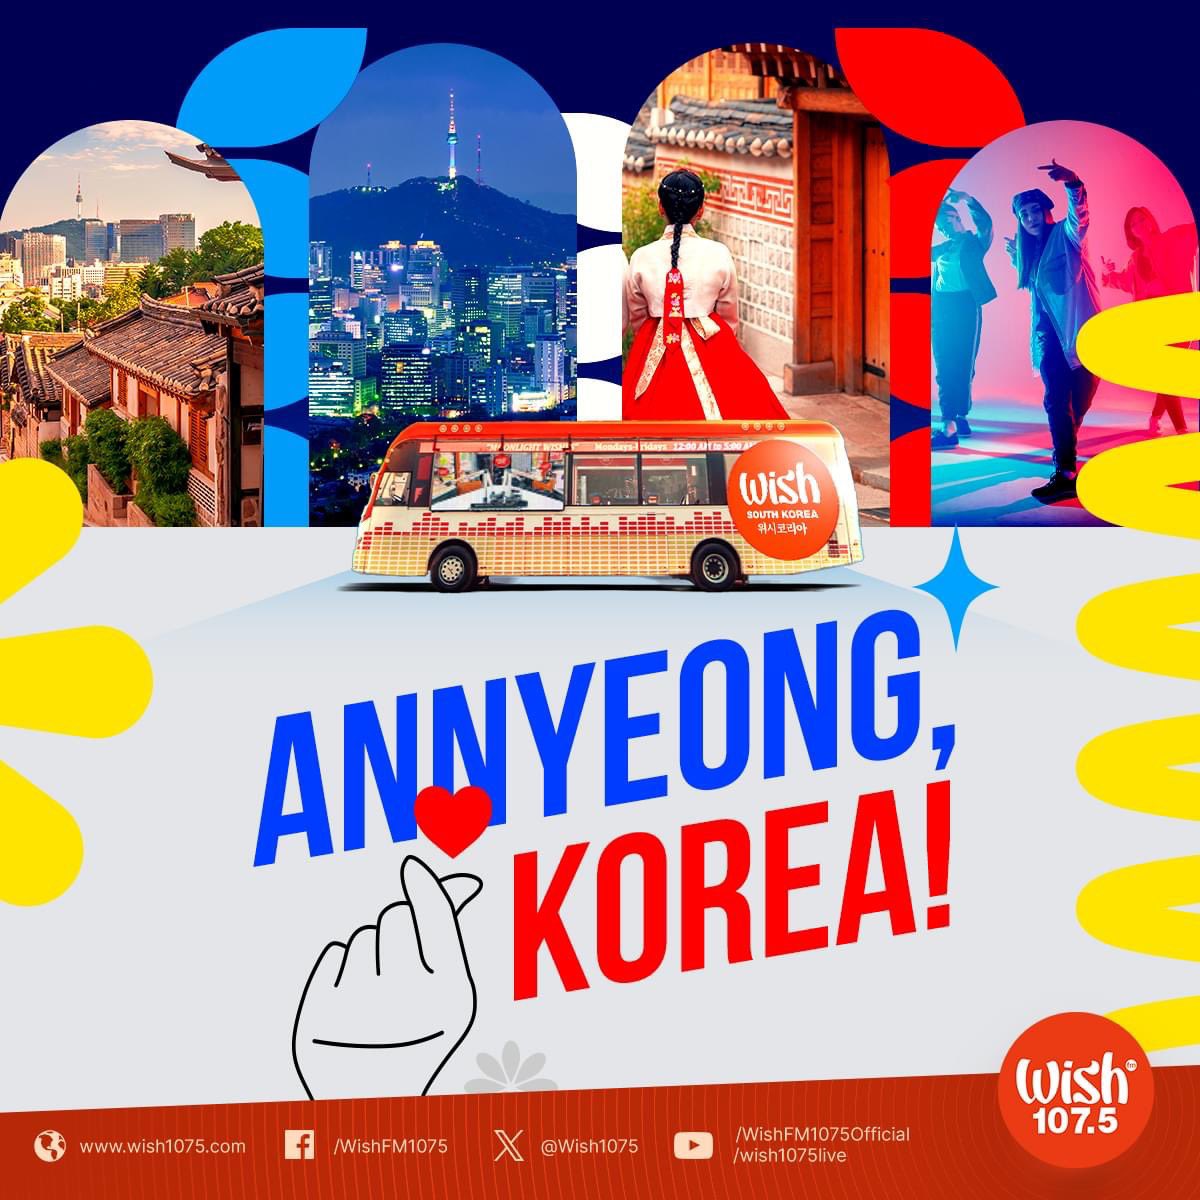 From the Philippines to Hollywood, and now, rolling into Hallyuwood! 🇰🇷 A new Wish Bus is about to hit the streets of the land of K-pop! 🚌 Wishers in South Korea, are you ready to experience live Wishclusive performances? Stay tuned for more details!